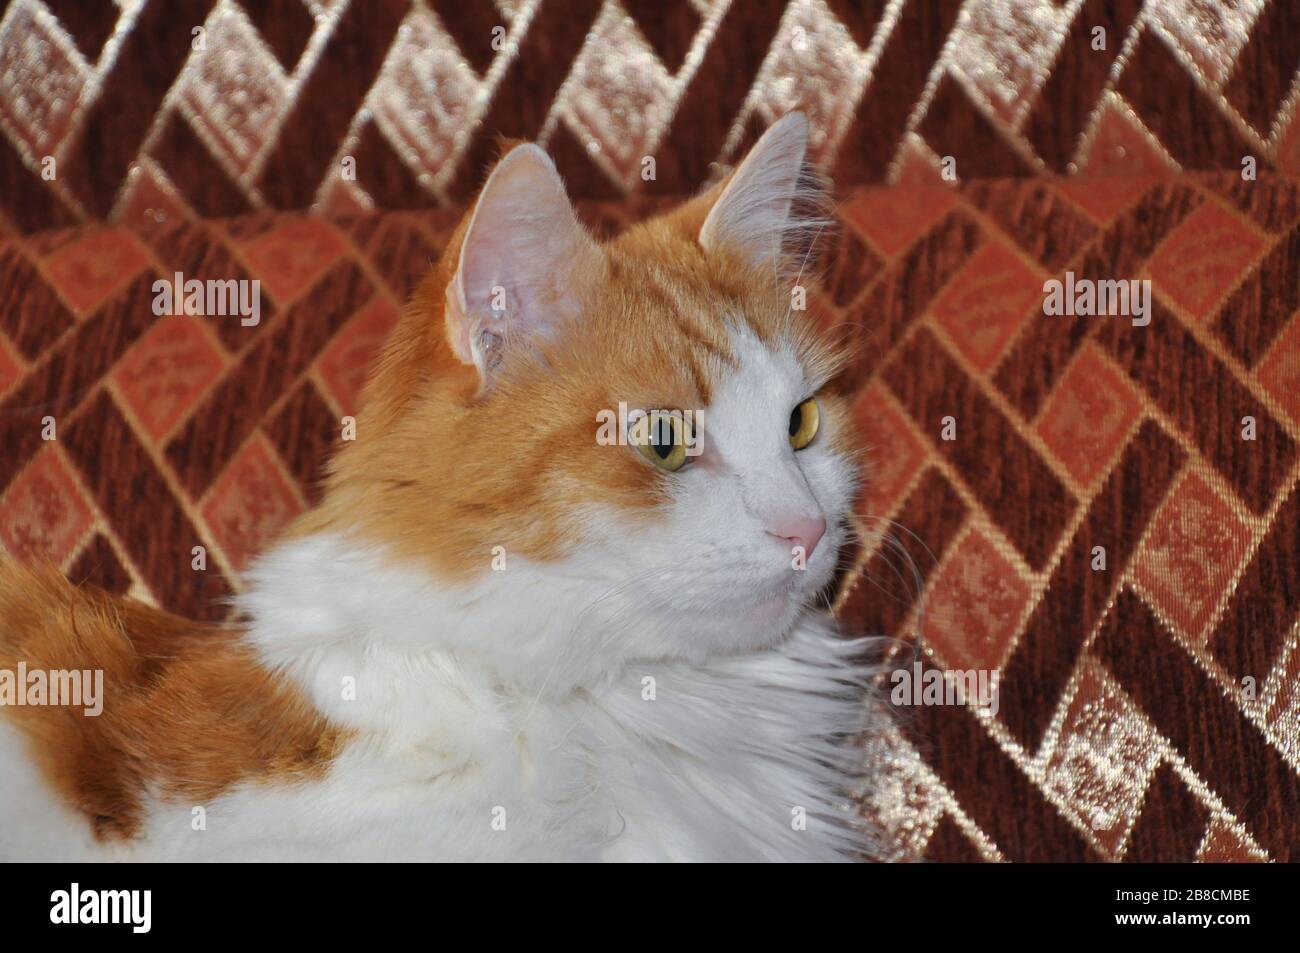 A portrait of cute fluffy surprised domestic cat Stock Photo